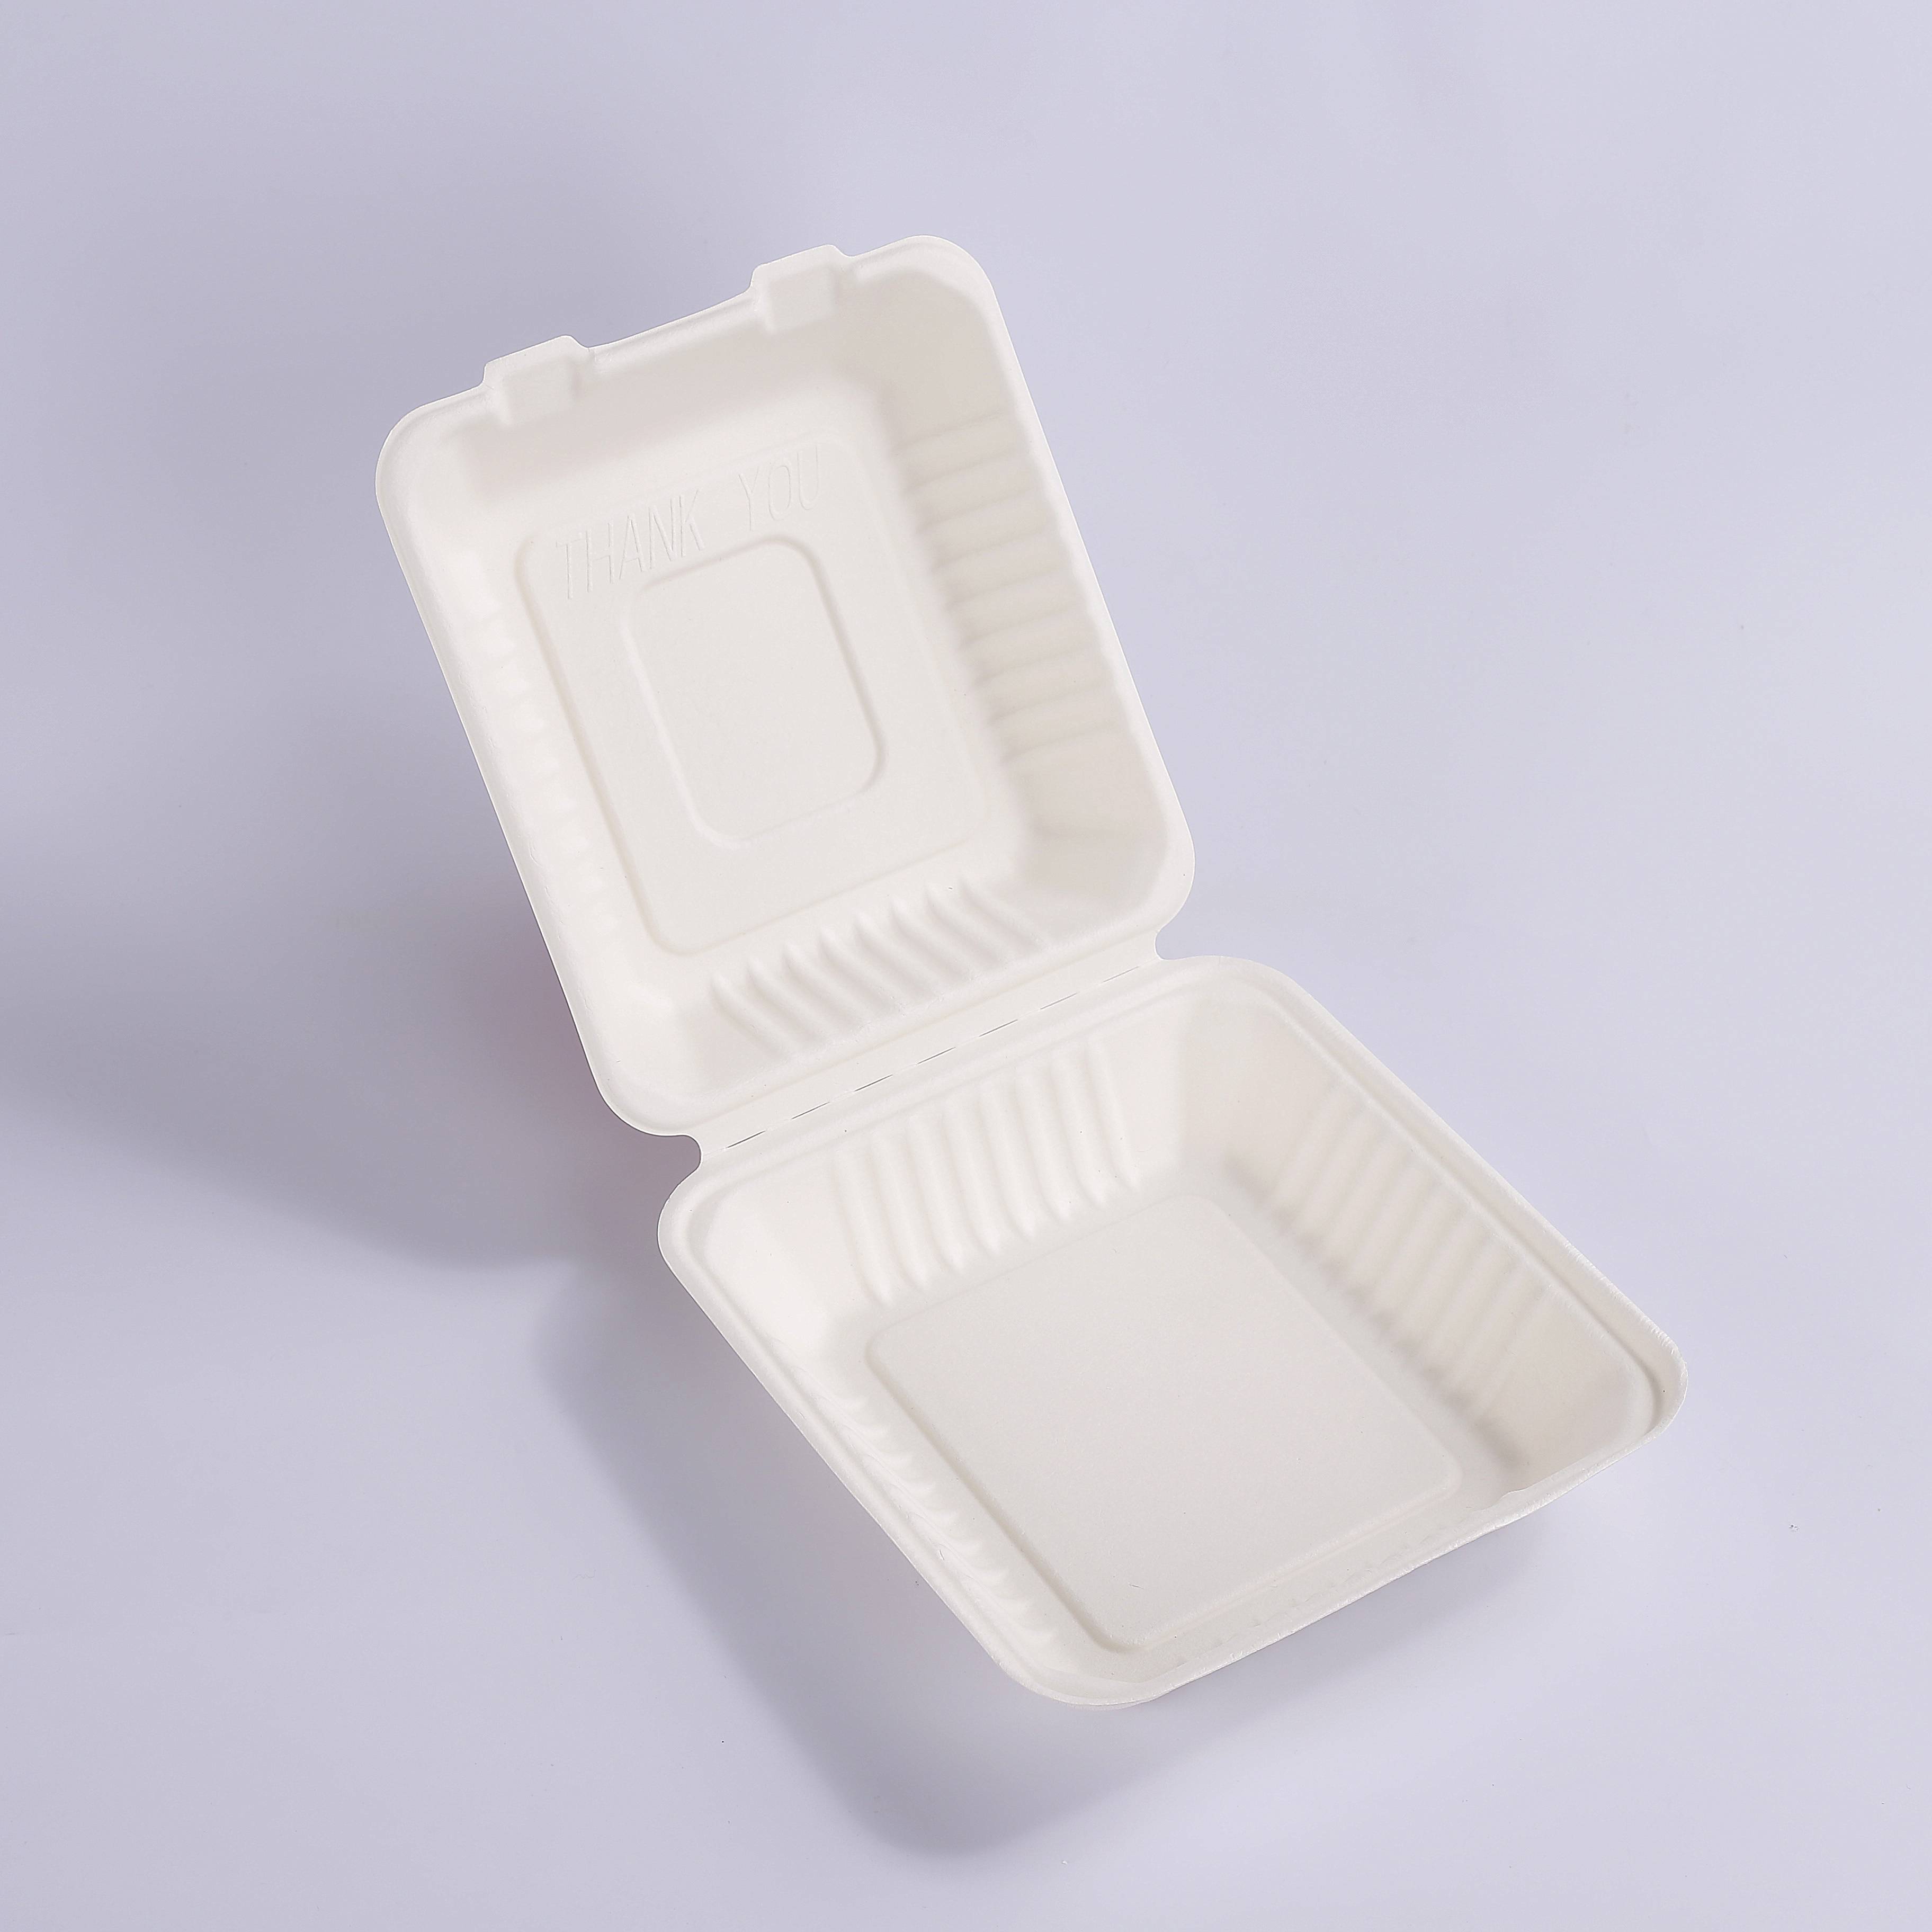 Factory wholesale Bagasse Meal Box - Bagasse 8*8″ Shallow Clamshell Takeout Containers, Biodegradable Eco Friendly Take Out to Go Food Containers with Lids for Lunch Leftover Meal Prep Stora...